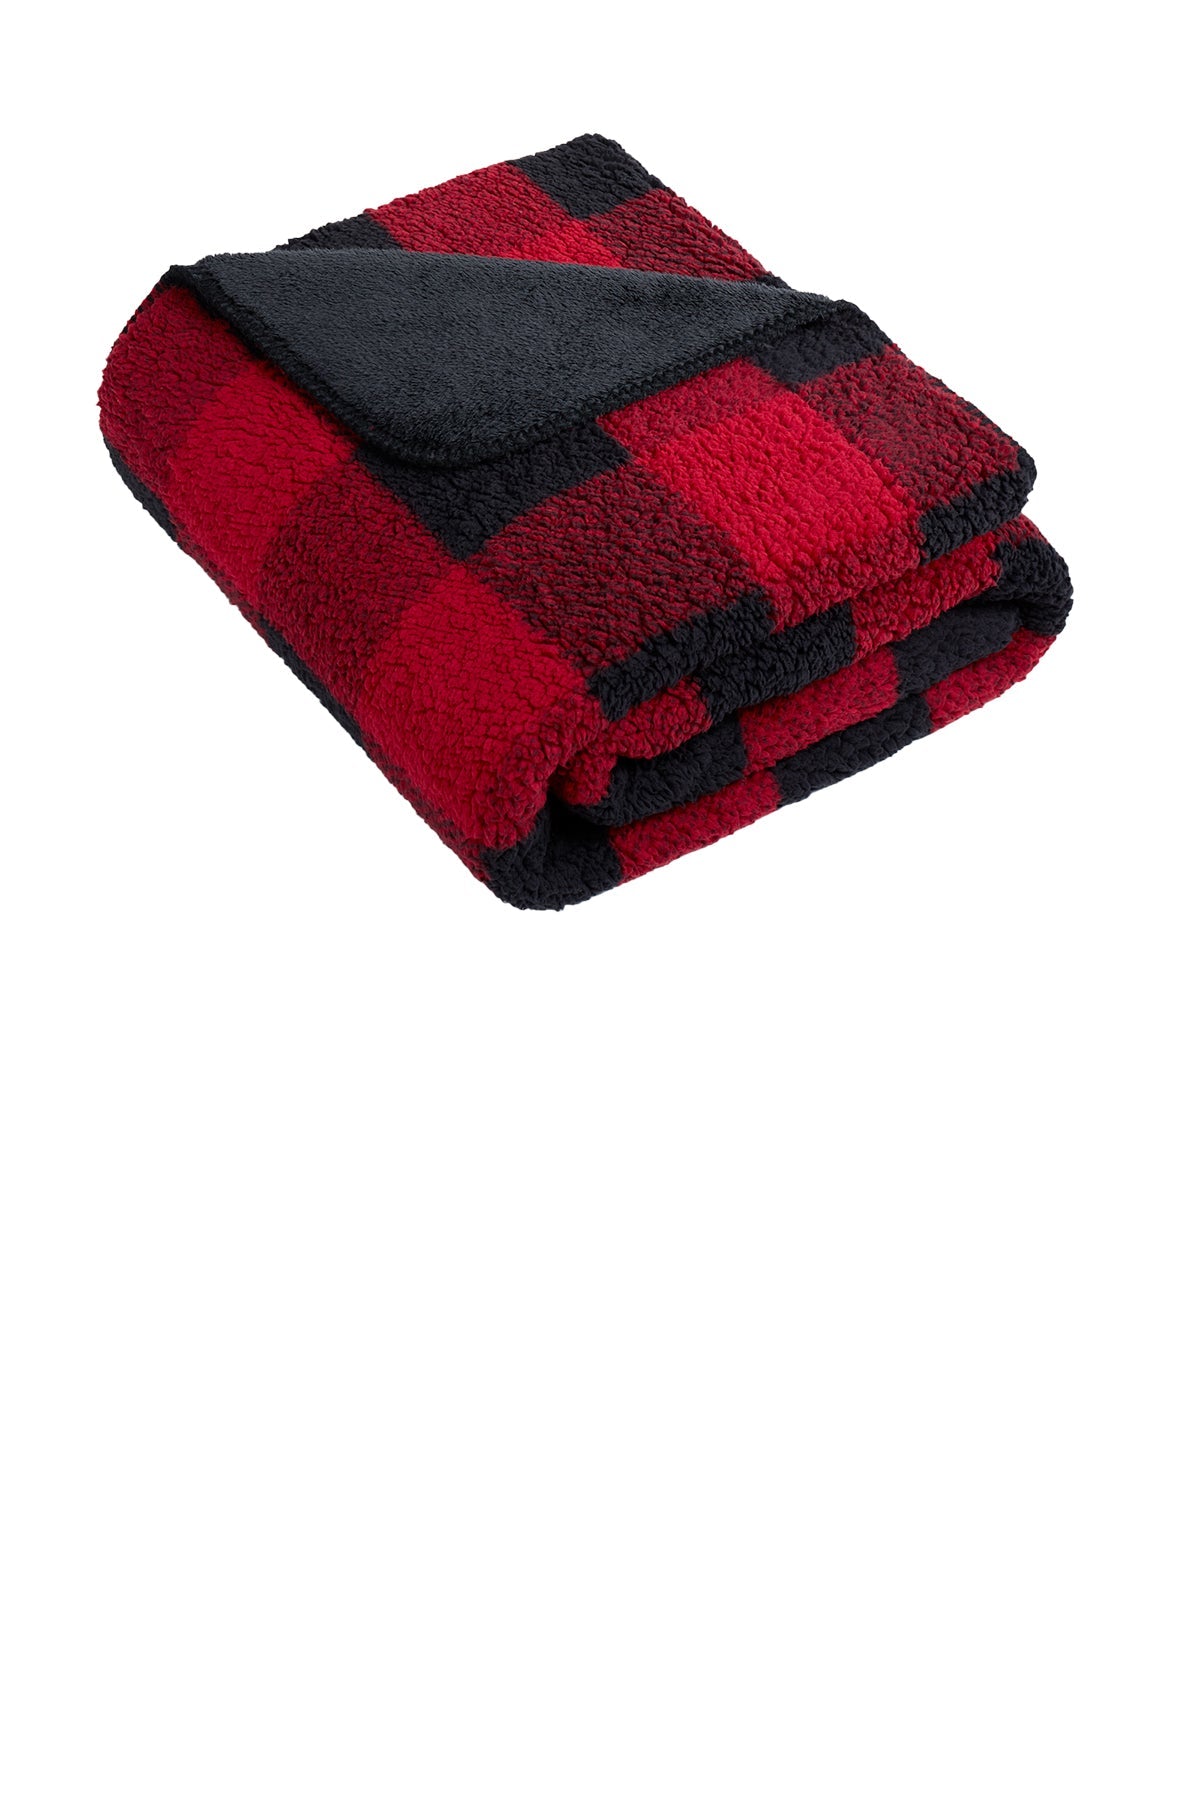 Port Authority Double-Sided Sherpa/Plush Blankets, Black/ Red Buffalo Plaid